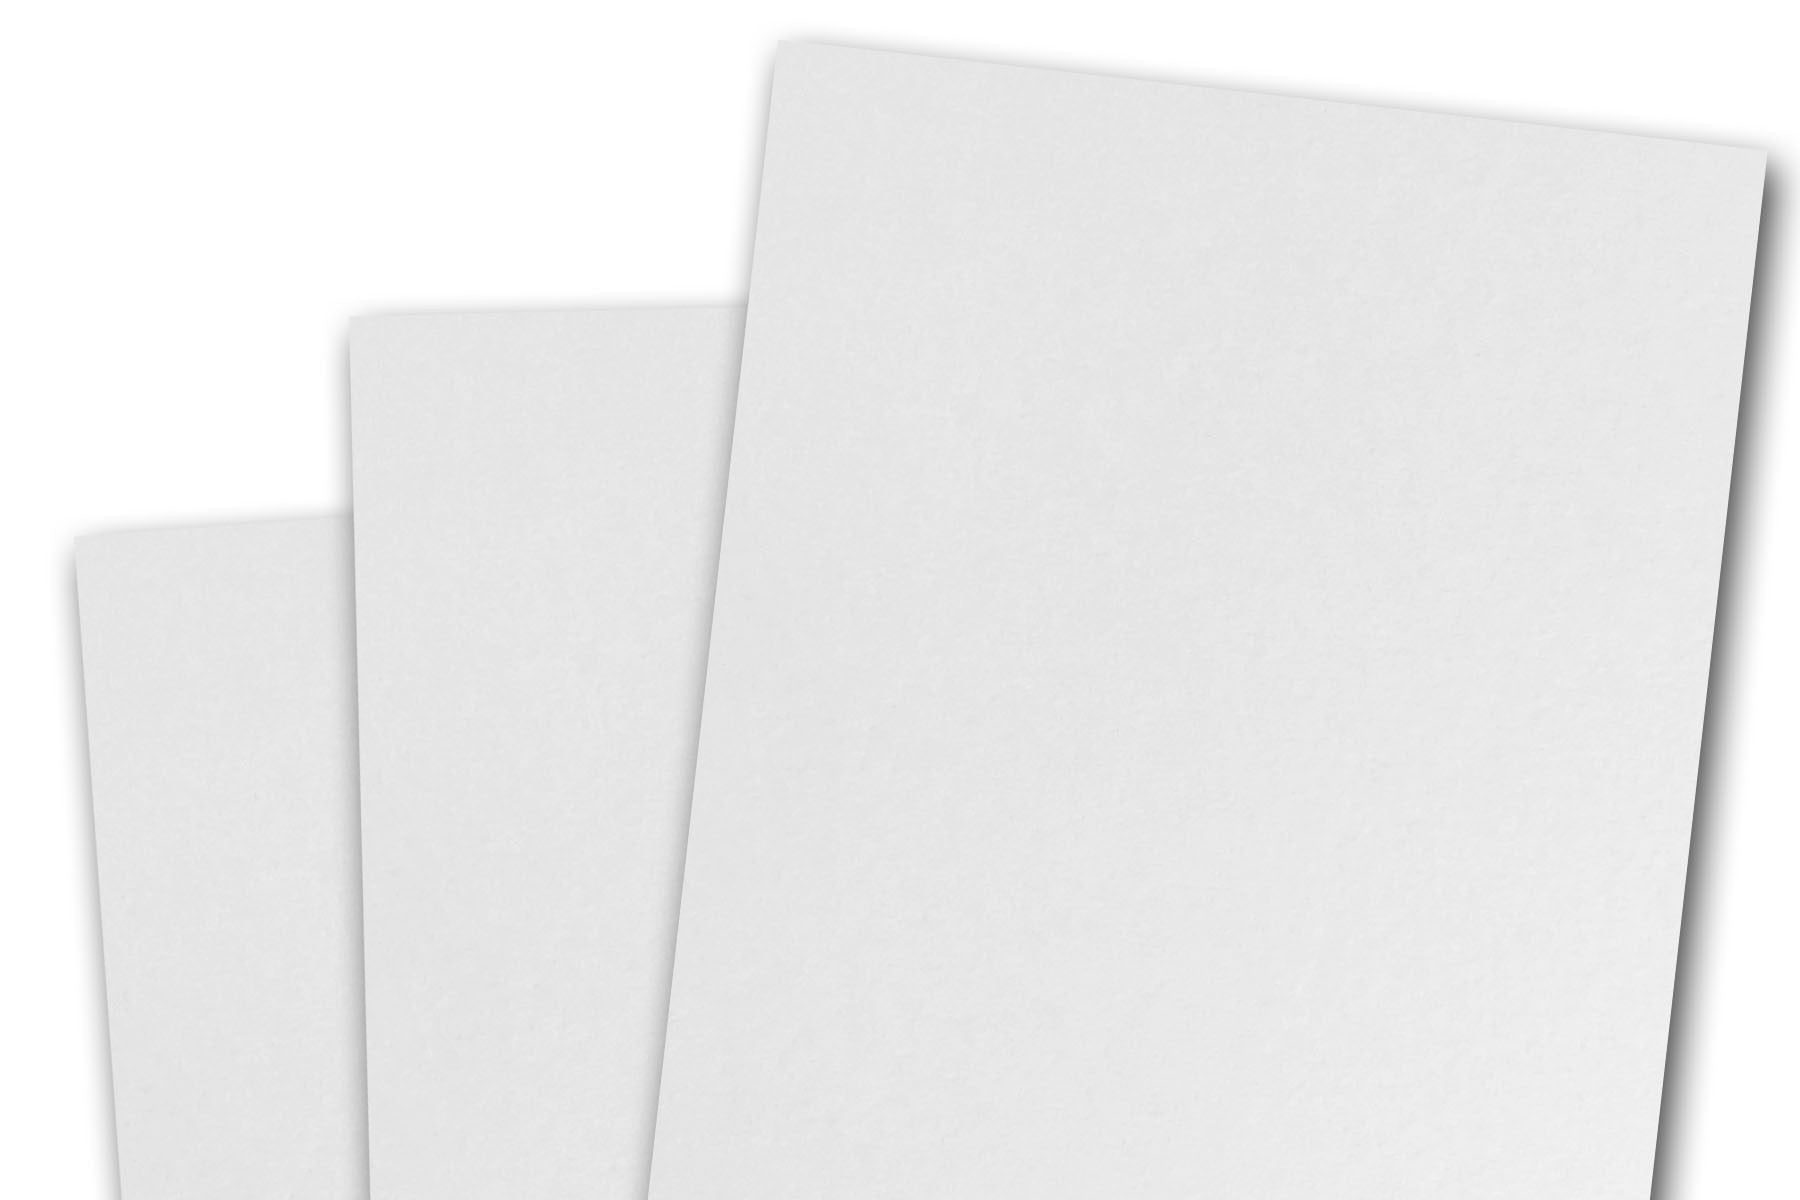  Premium Colored Blank 4x6 Card Stock (250 Pack, Black